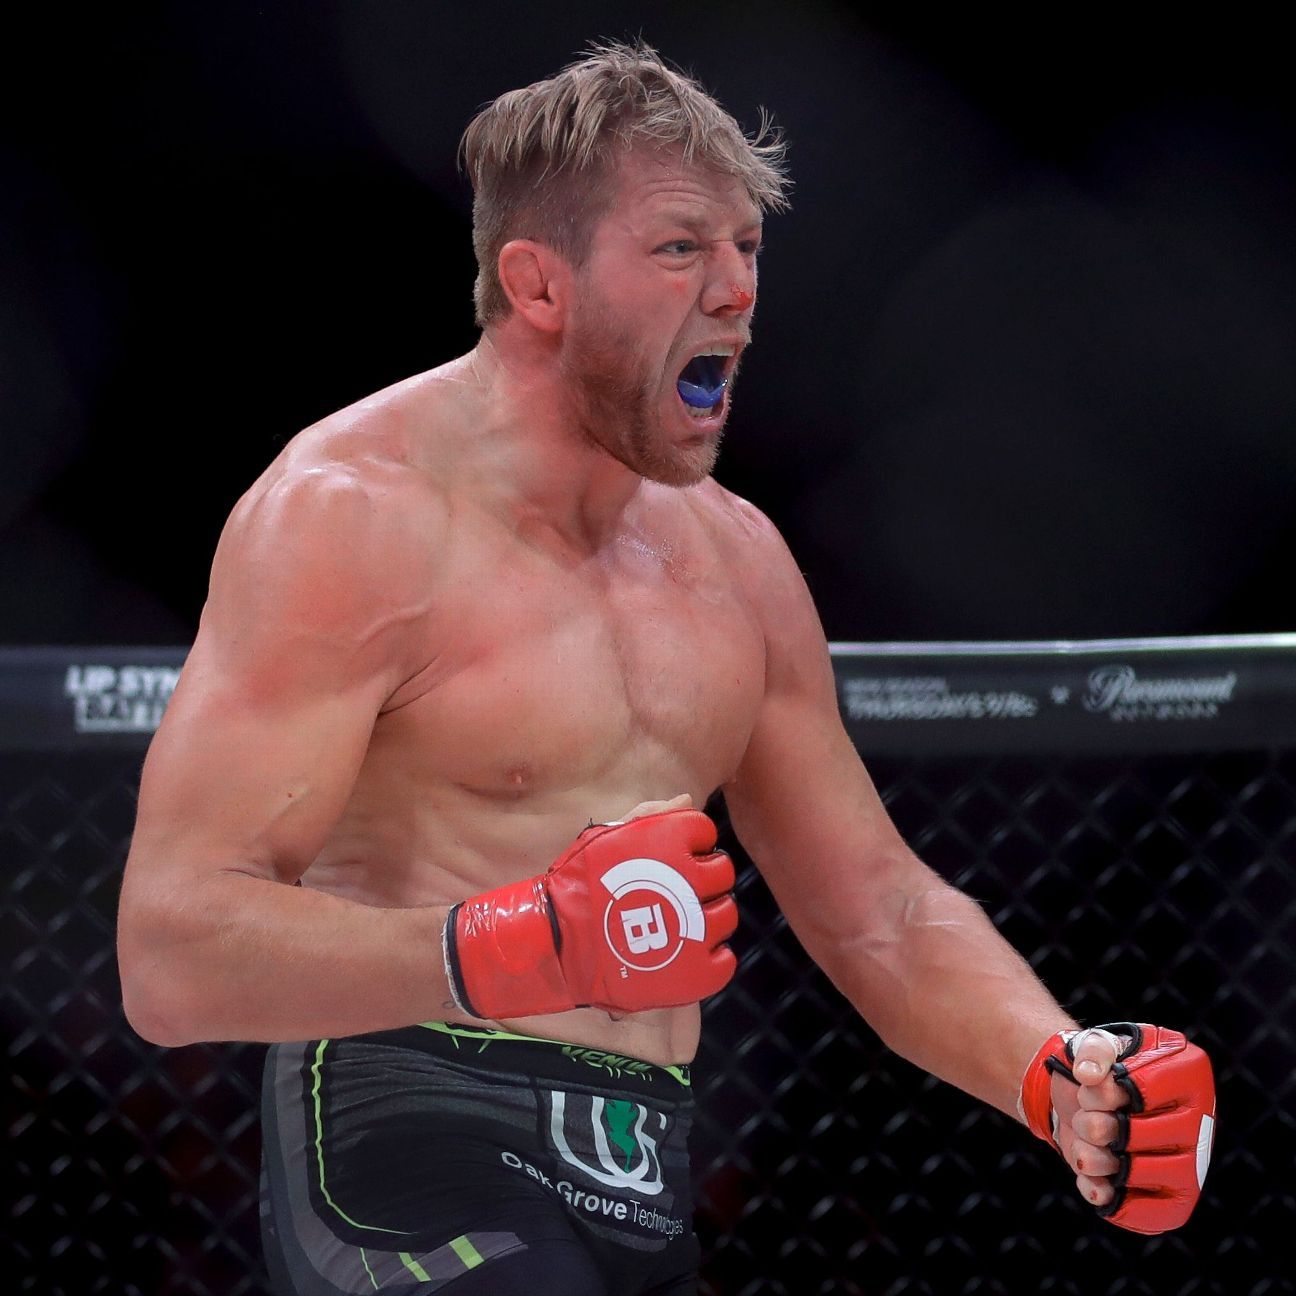 Heavyweight Jake Hager's second pro bout set for Bellator 221